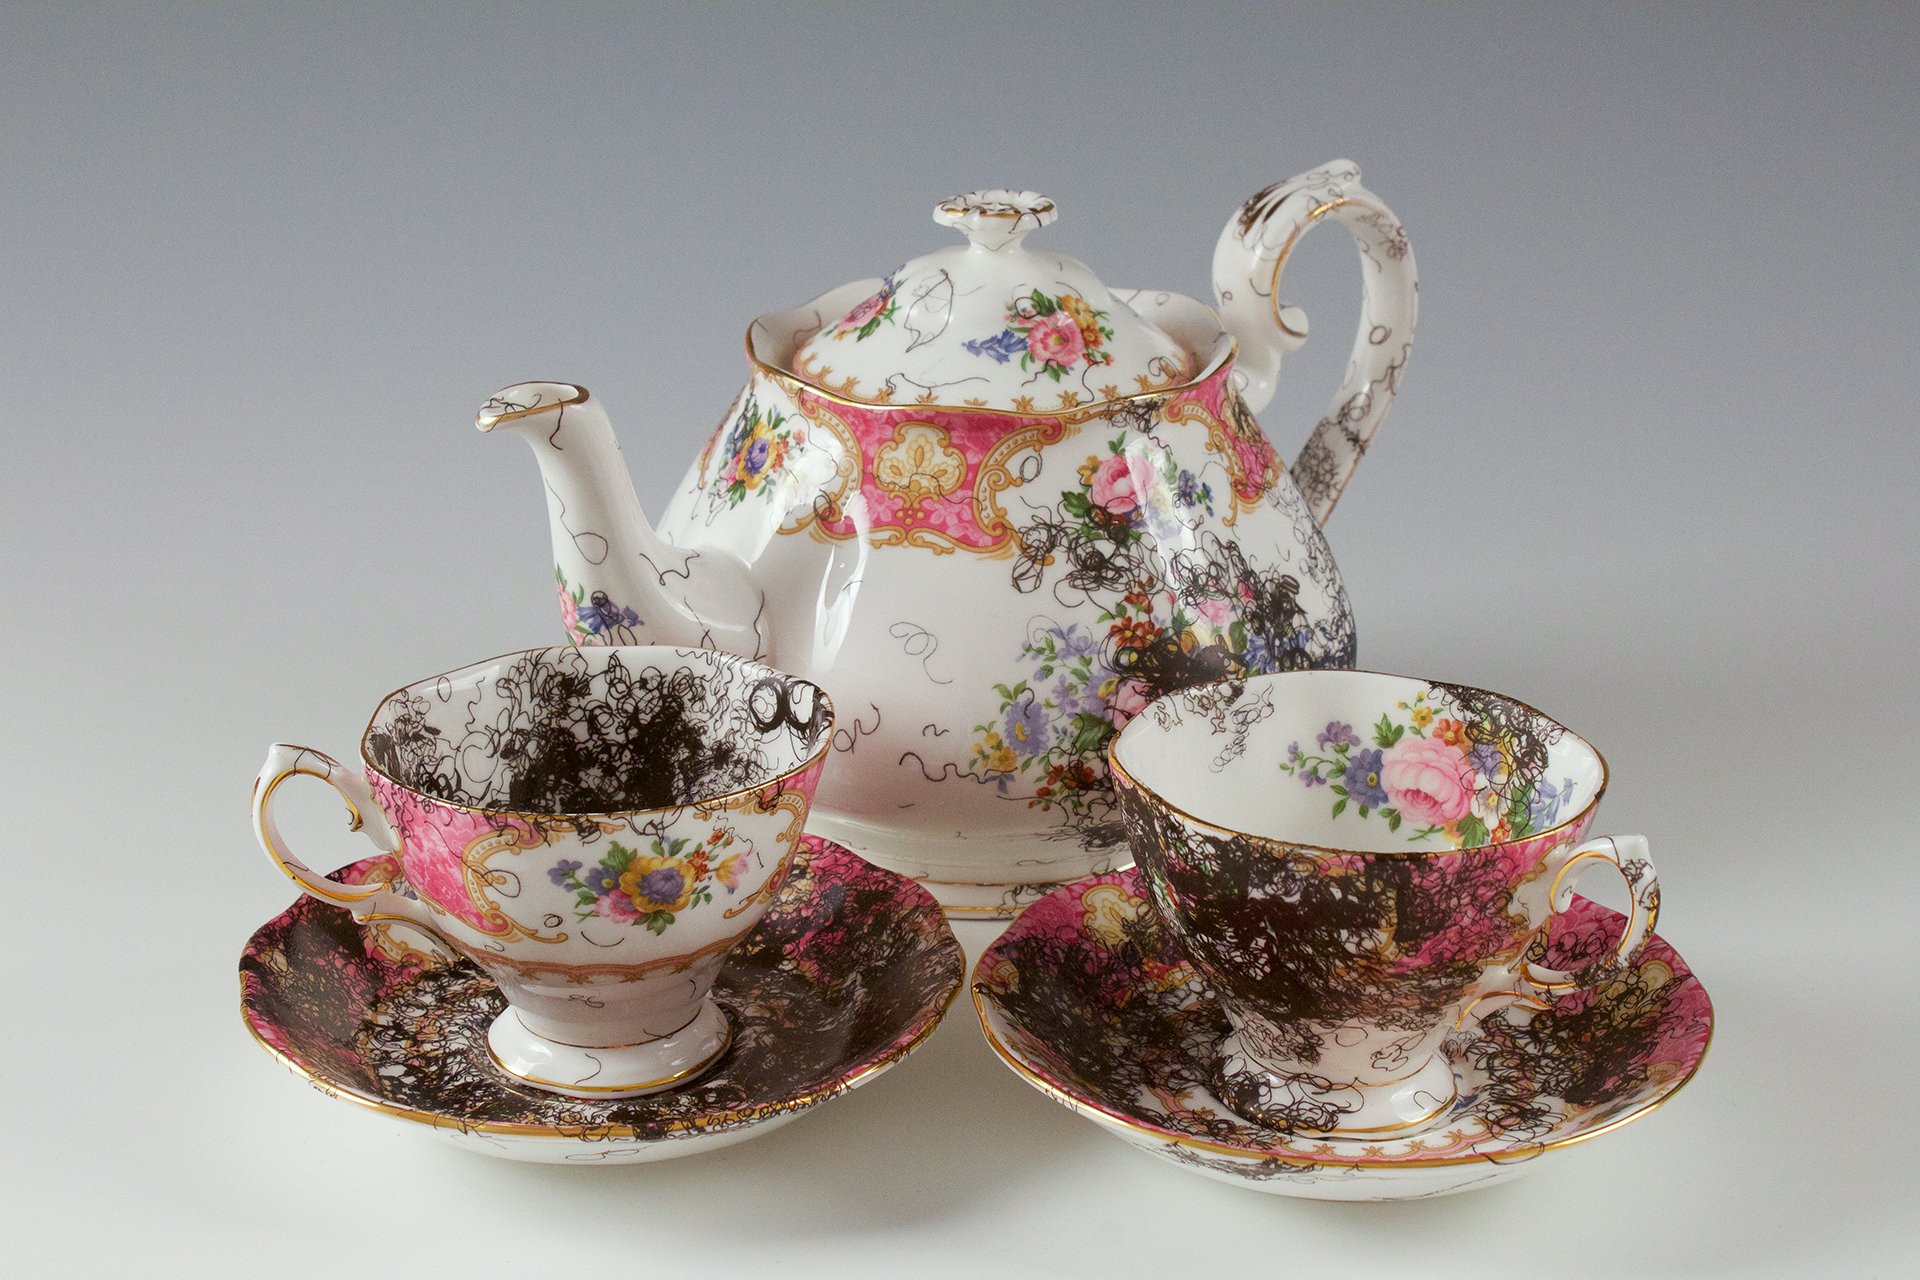 A vintage, china teapot and two cups and saucers with floral decorations is overlaid with decal drawings of curly, black hair.